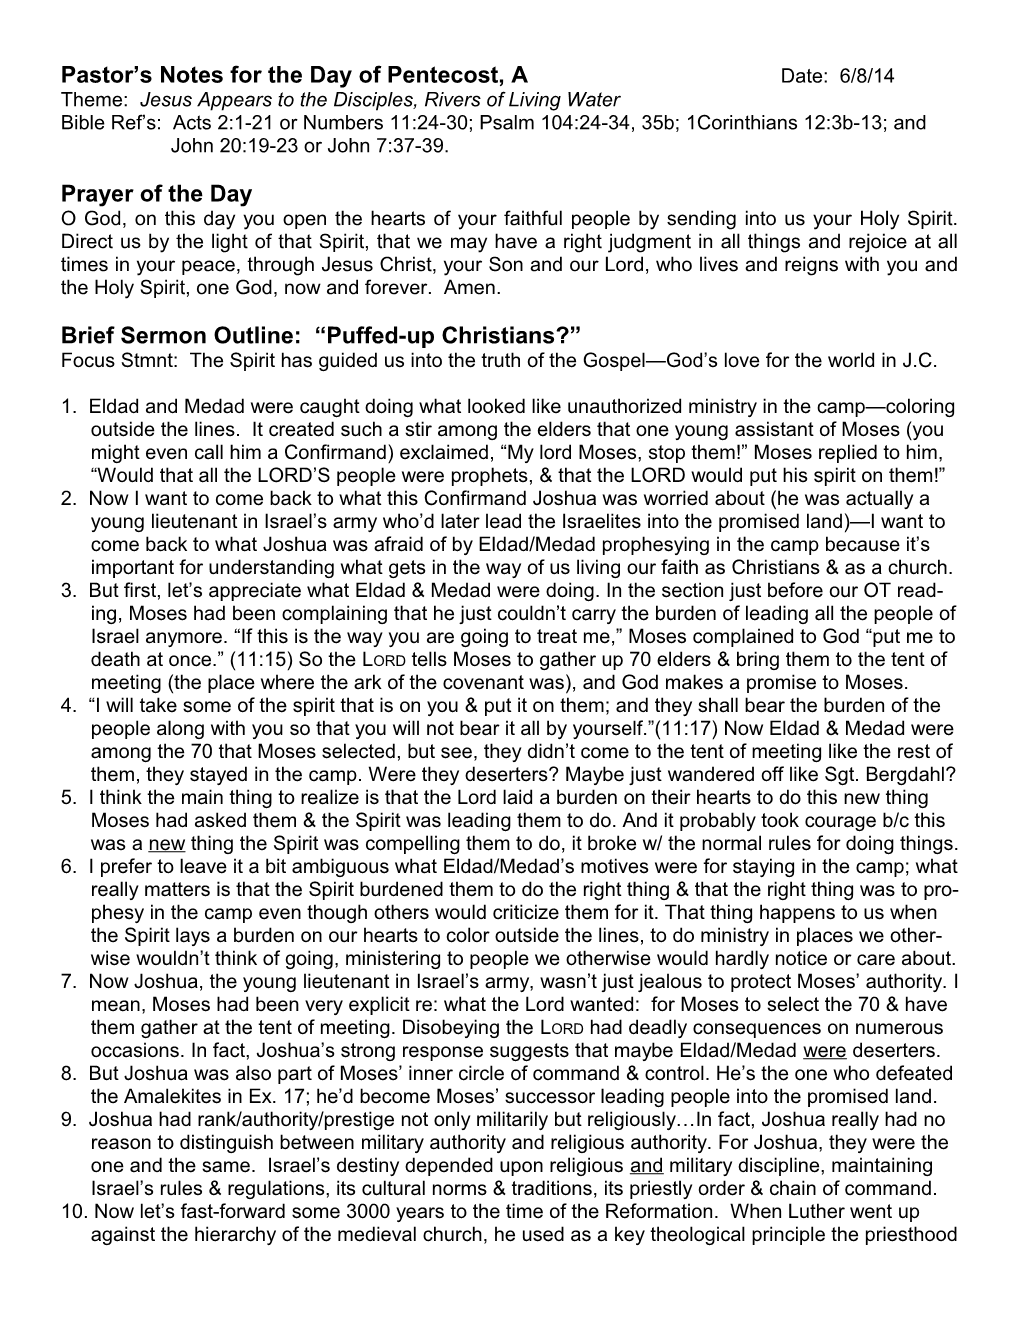 Pastor S Notes for the Day of Pentecost, a Date: 6/8/14